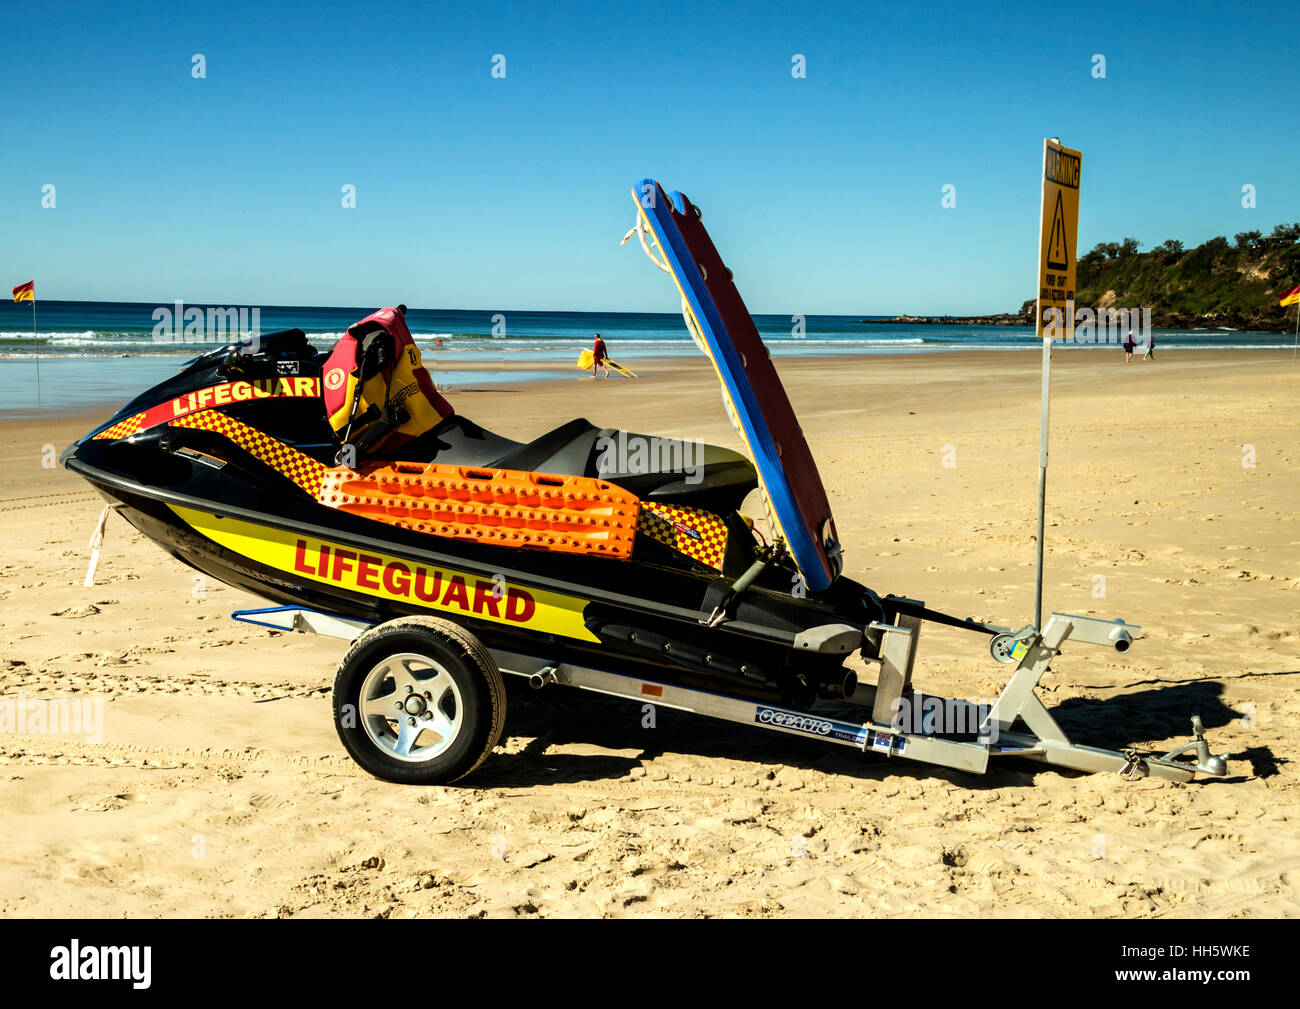 Lifeguard rescue boat on standby at Coolum beach Stock Photo